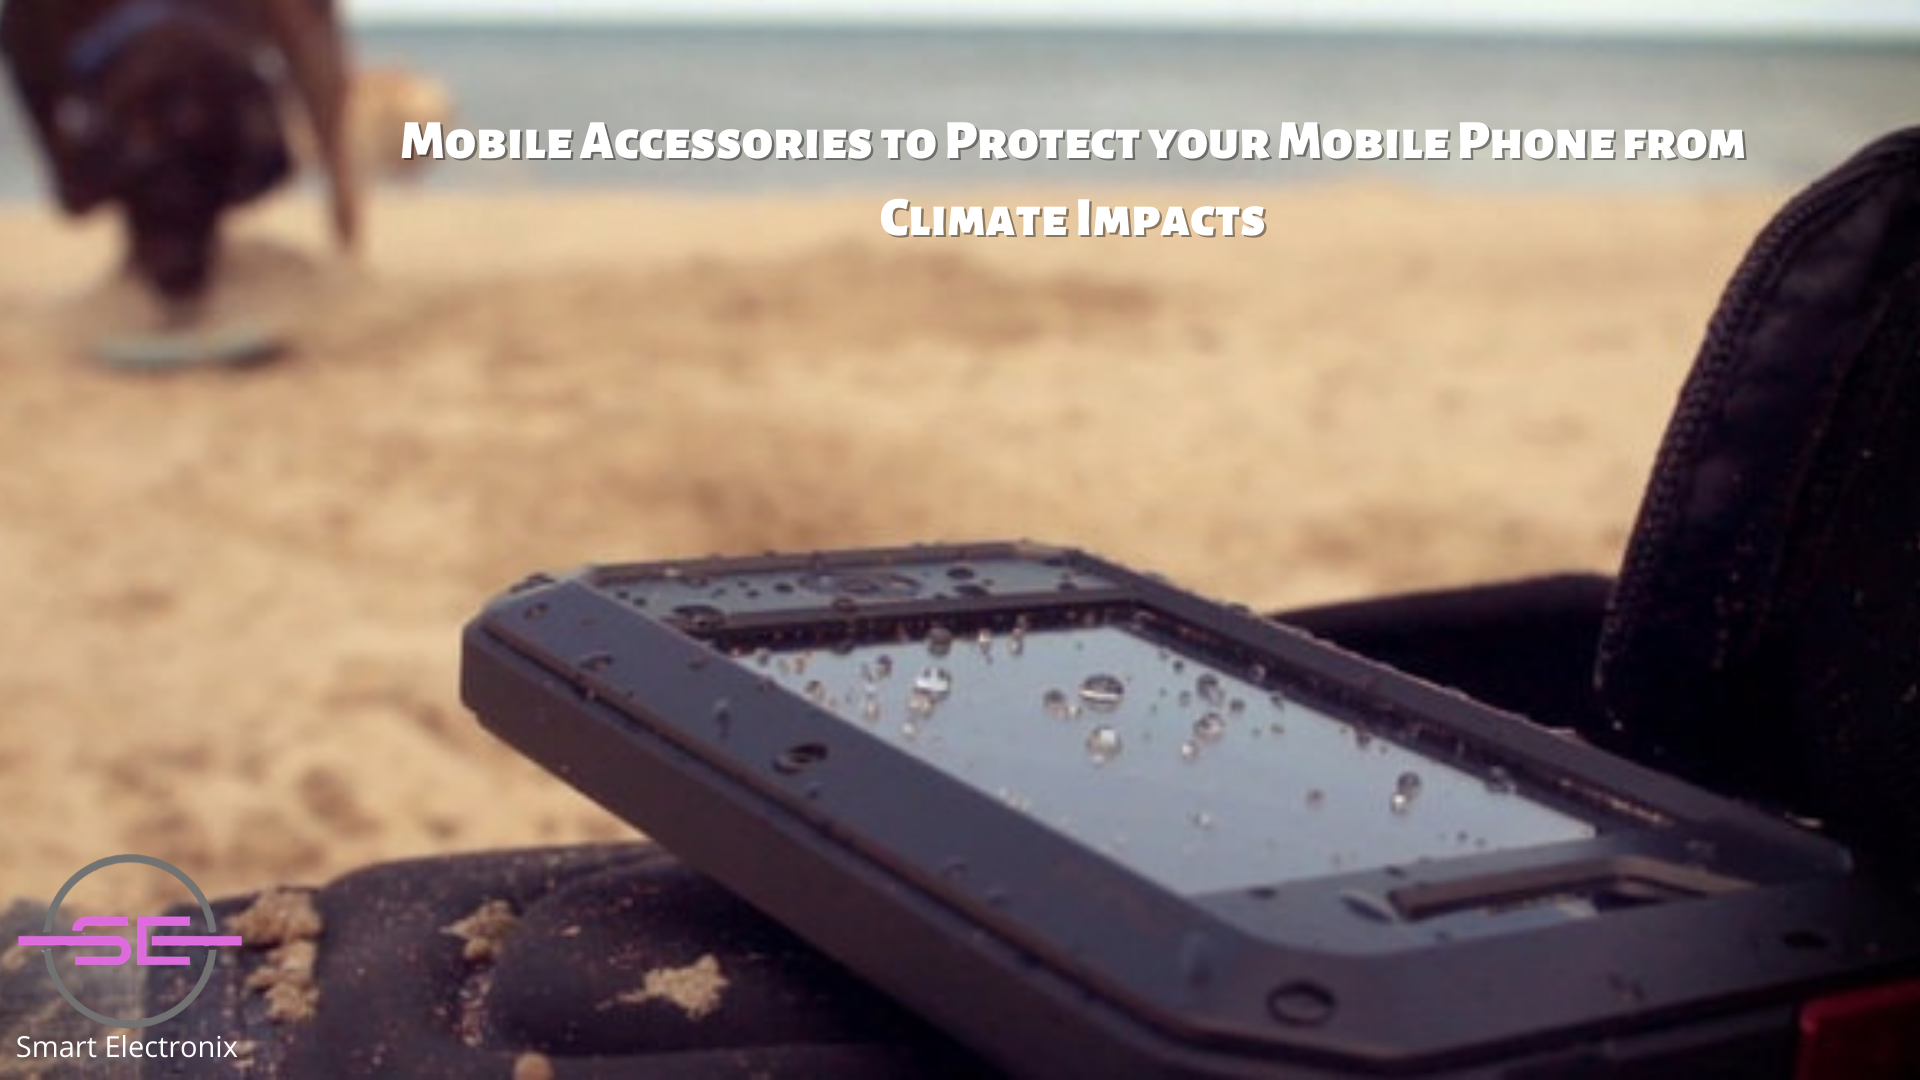 Mobile Accessories to Protect your Mobile Phone from Climate Impacts